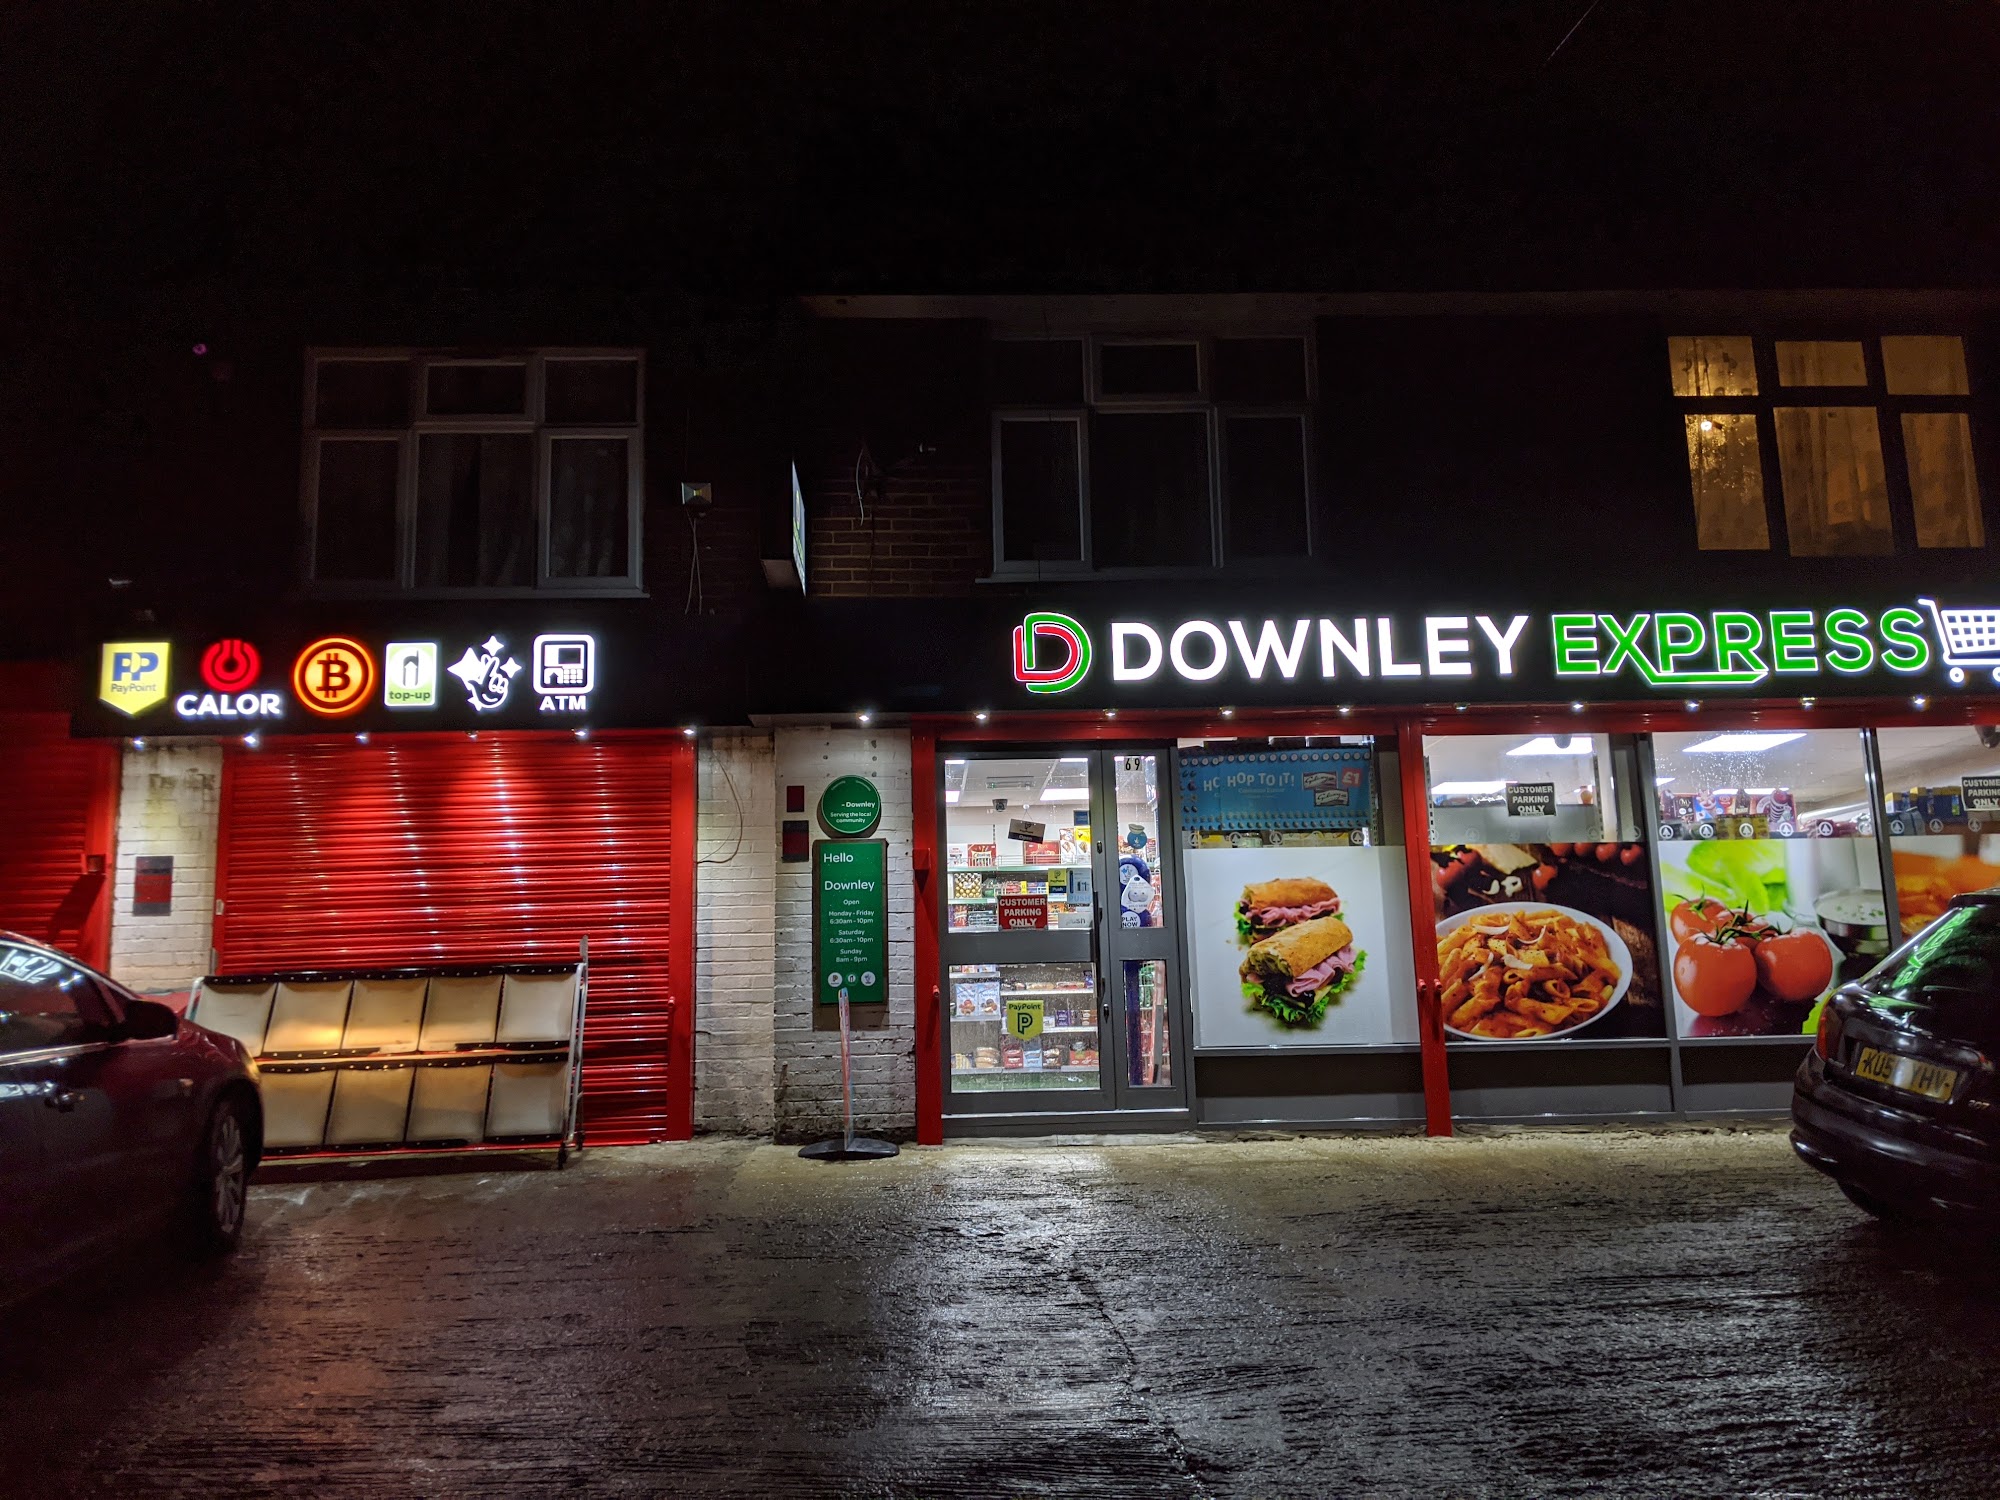 Downley Express